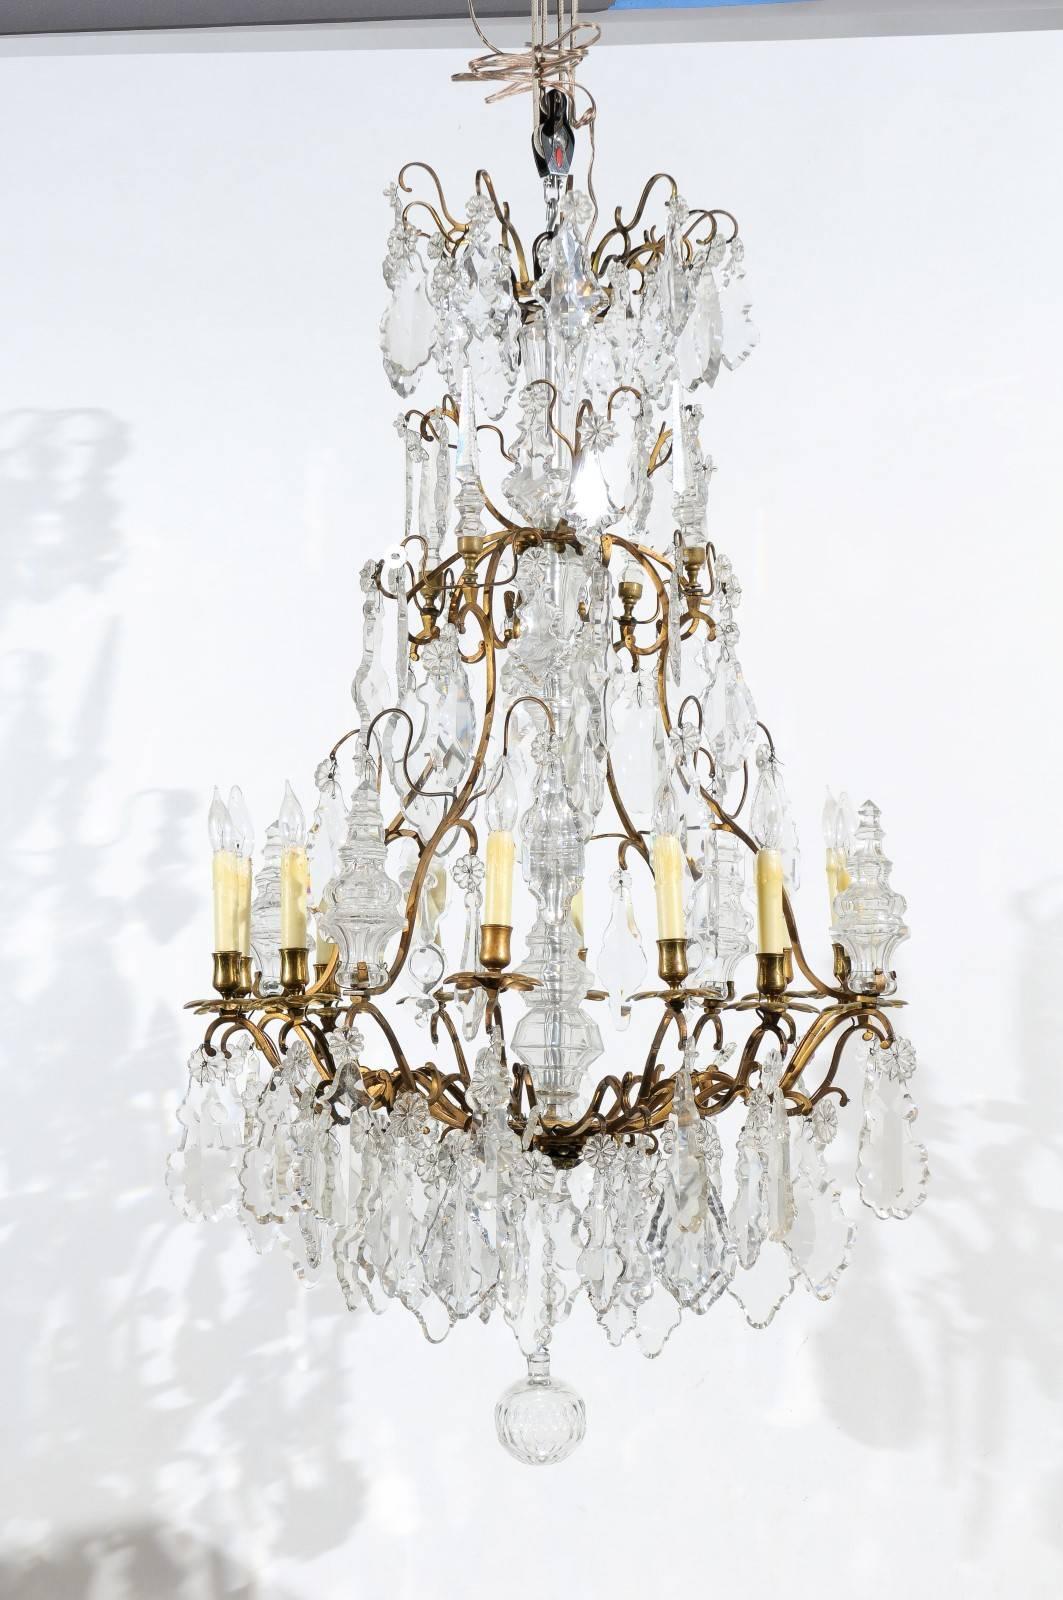 19th century Louis XV style bronze frame chandelier with crystal pendants and 12 lights.